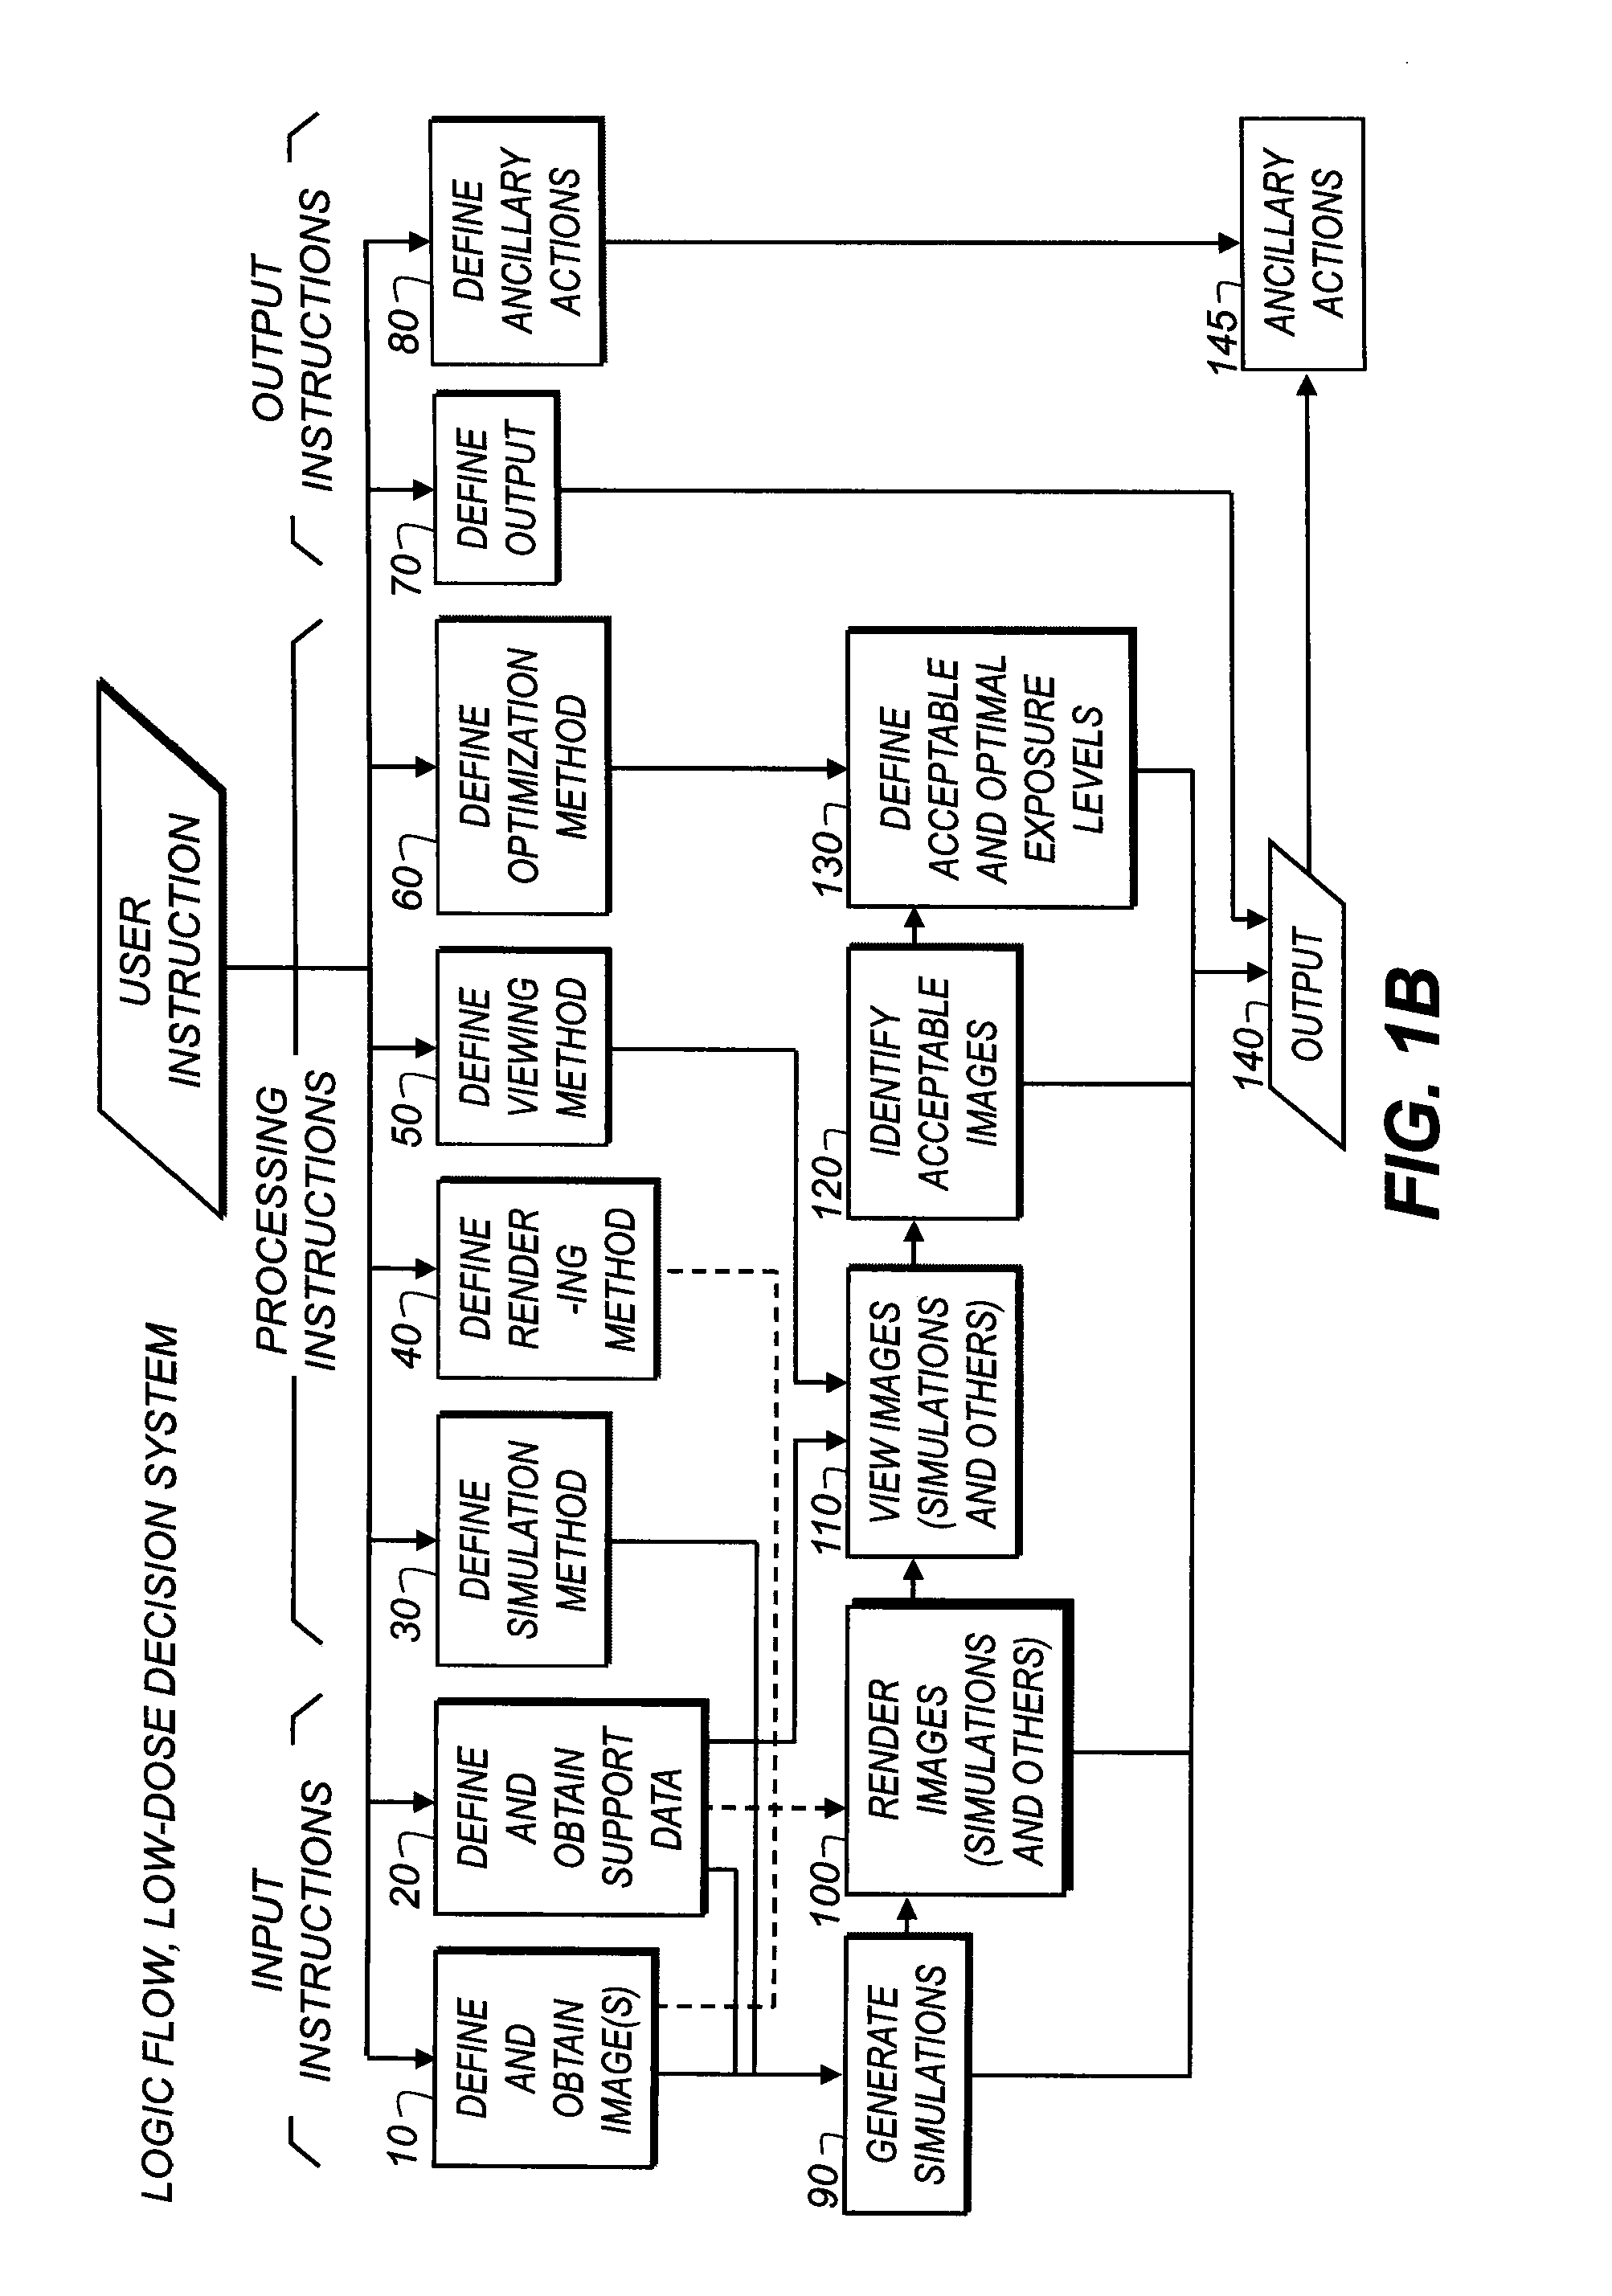 Dose-reduction decision system for medical images